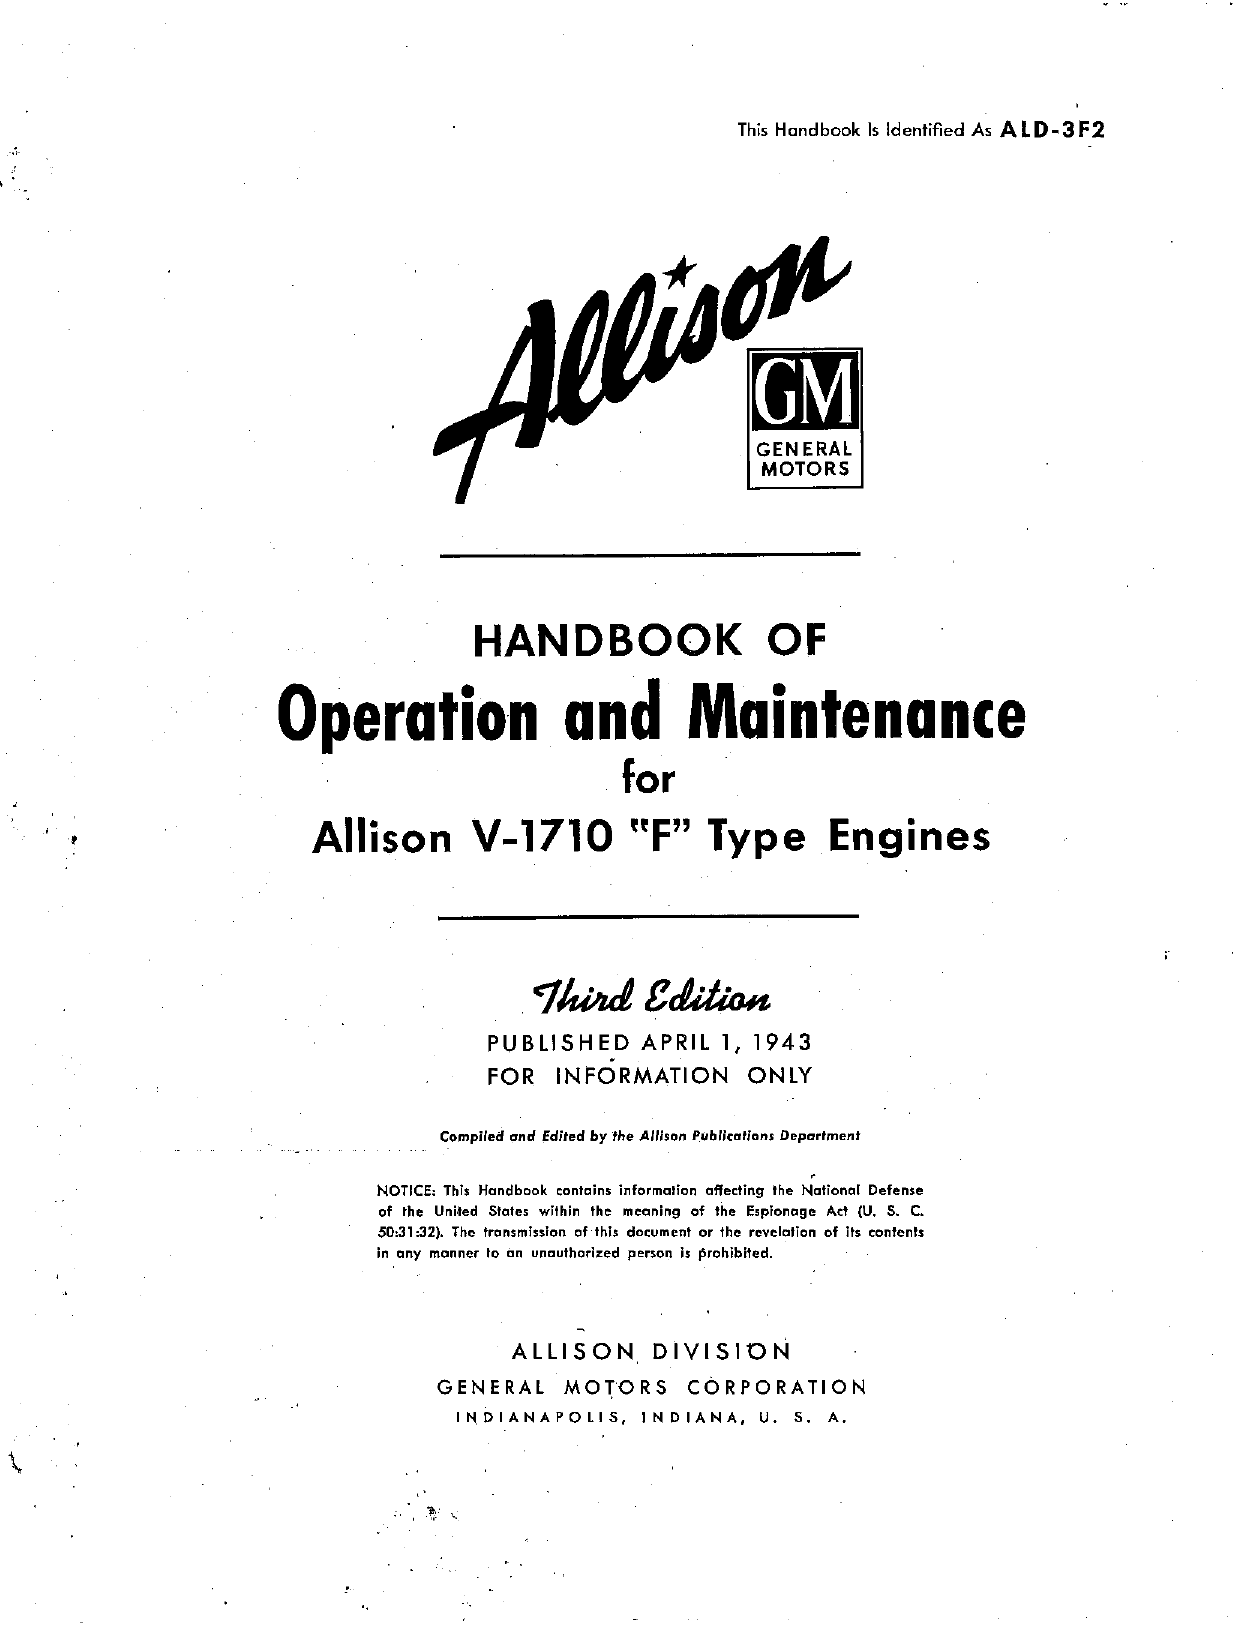 Sample page 1 from AirCorps Library document: Operation and Maintenance for Allison V-1710 F Type Engines - Third Edition